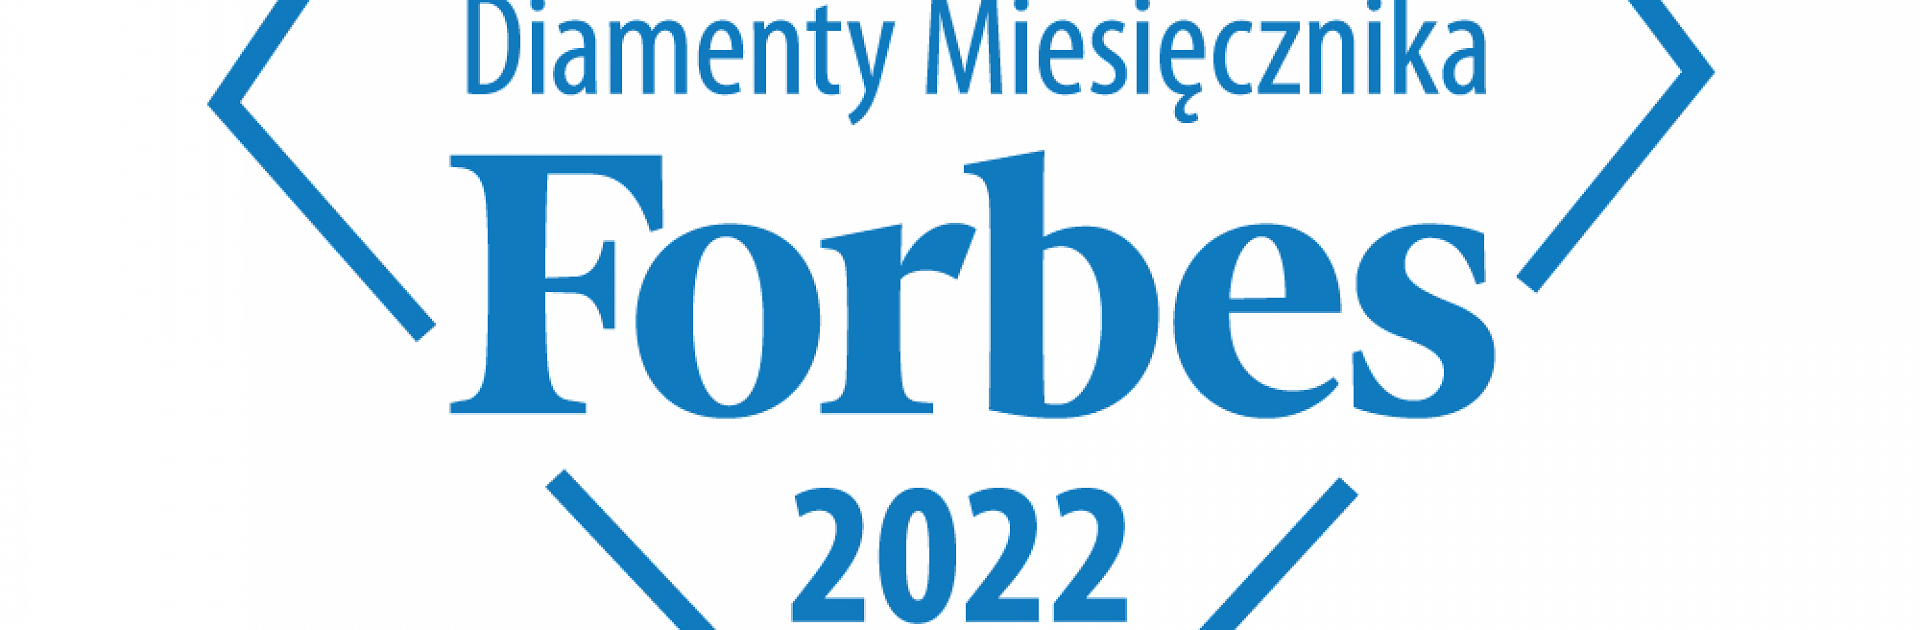 Diament_Forbes_2022_blue.png